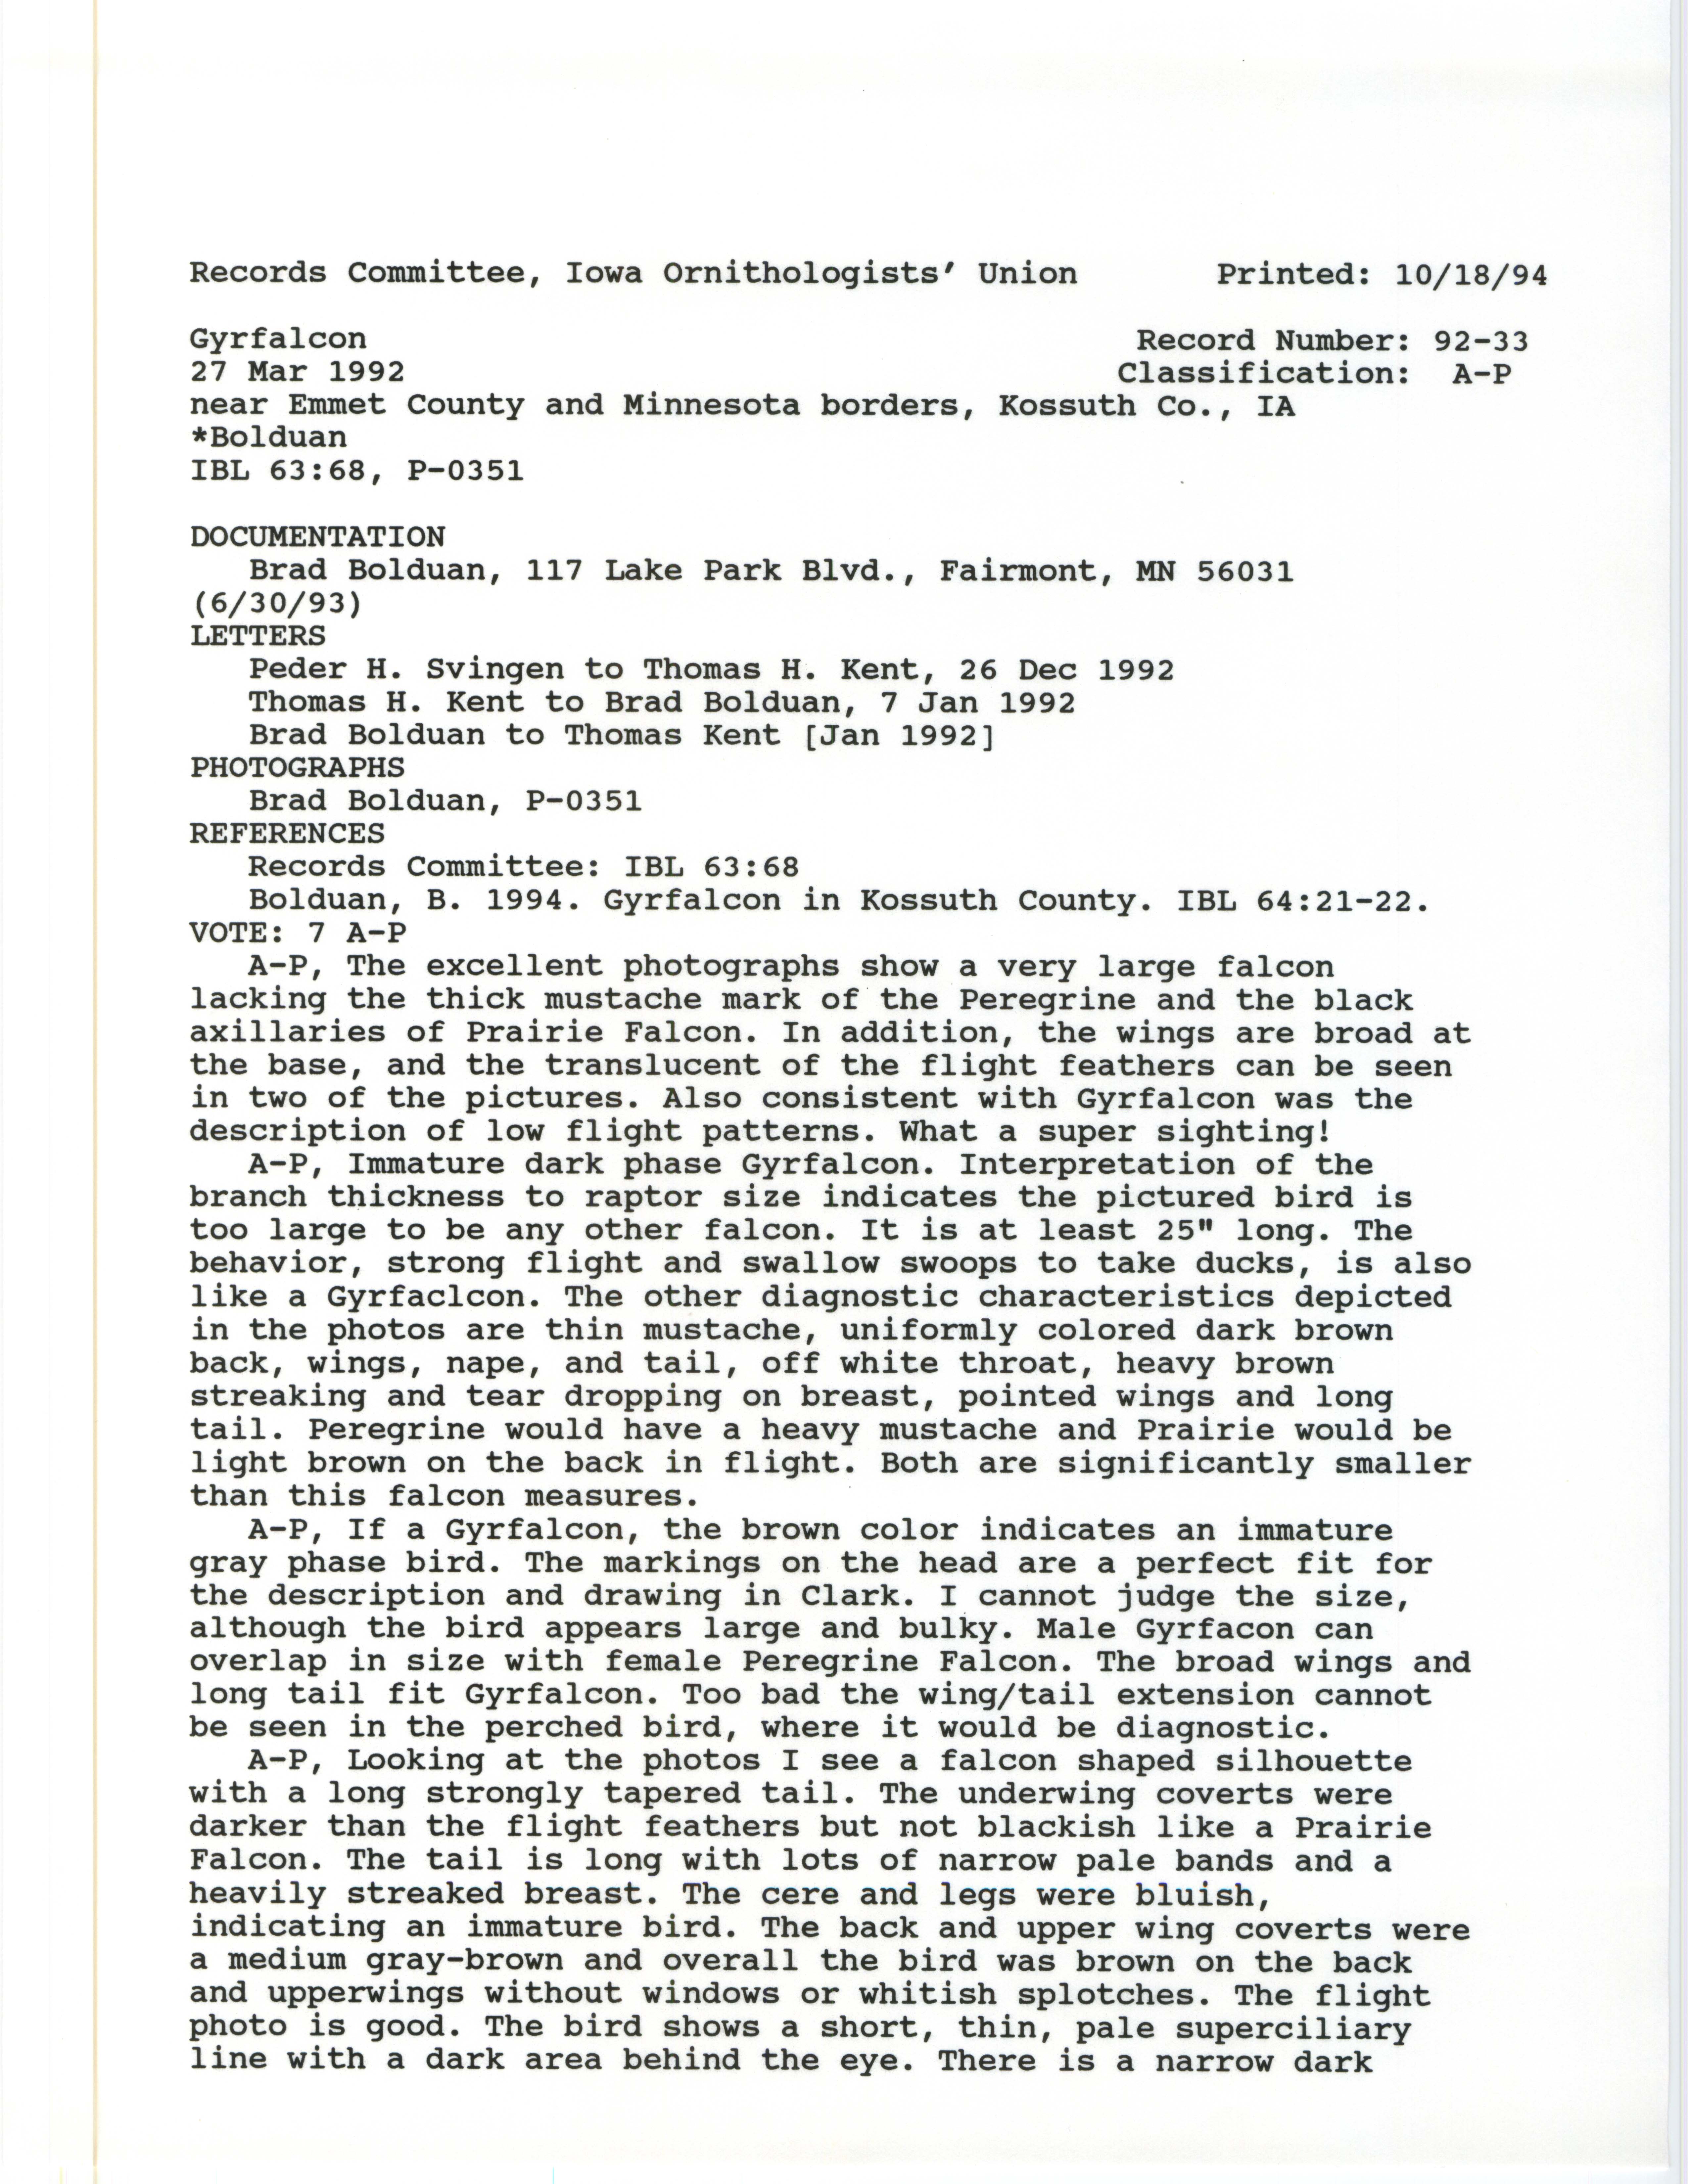 Records Committee review for rare bird sighting for Gyrfalcon at Iowa Lake Wildlife Management Area in 1992